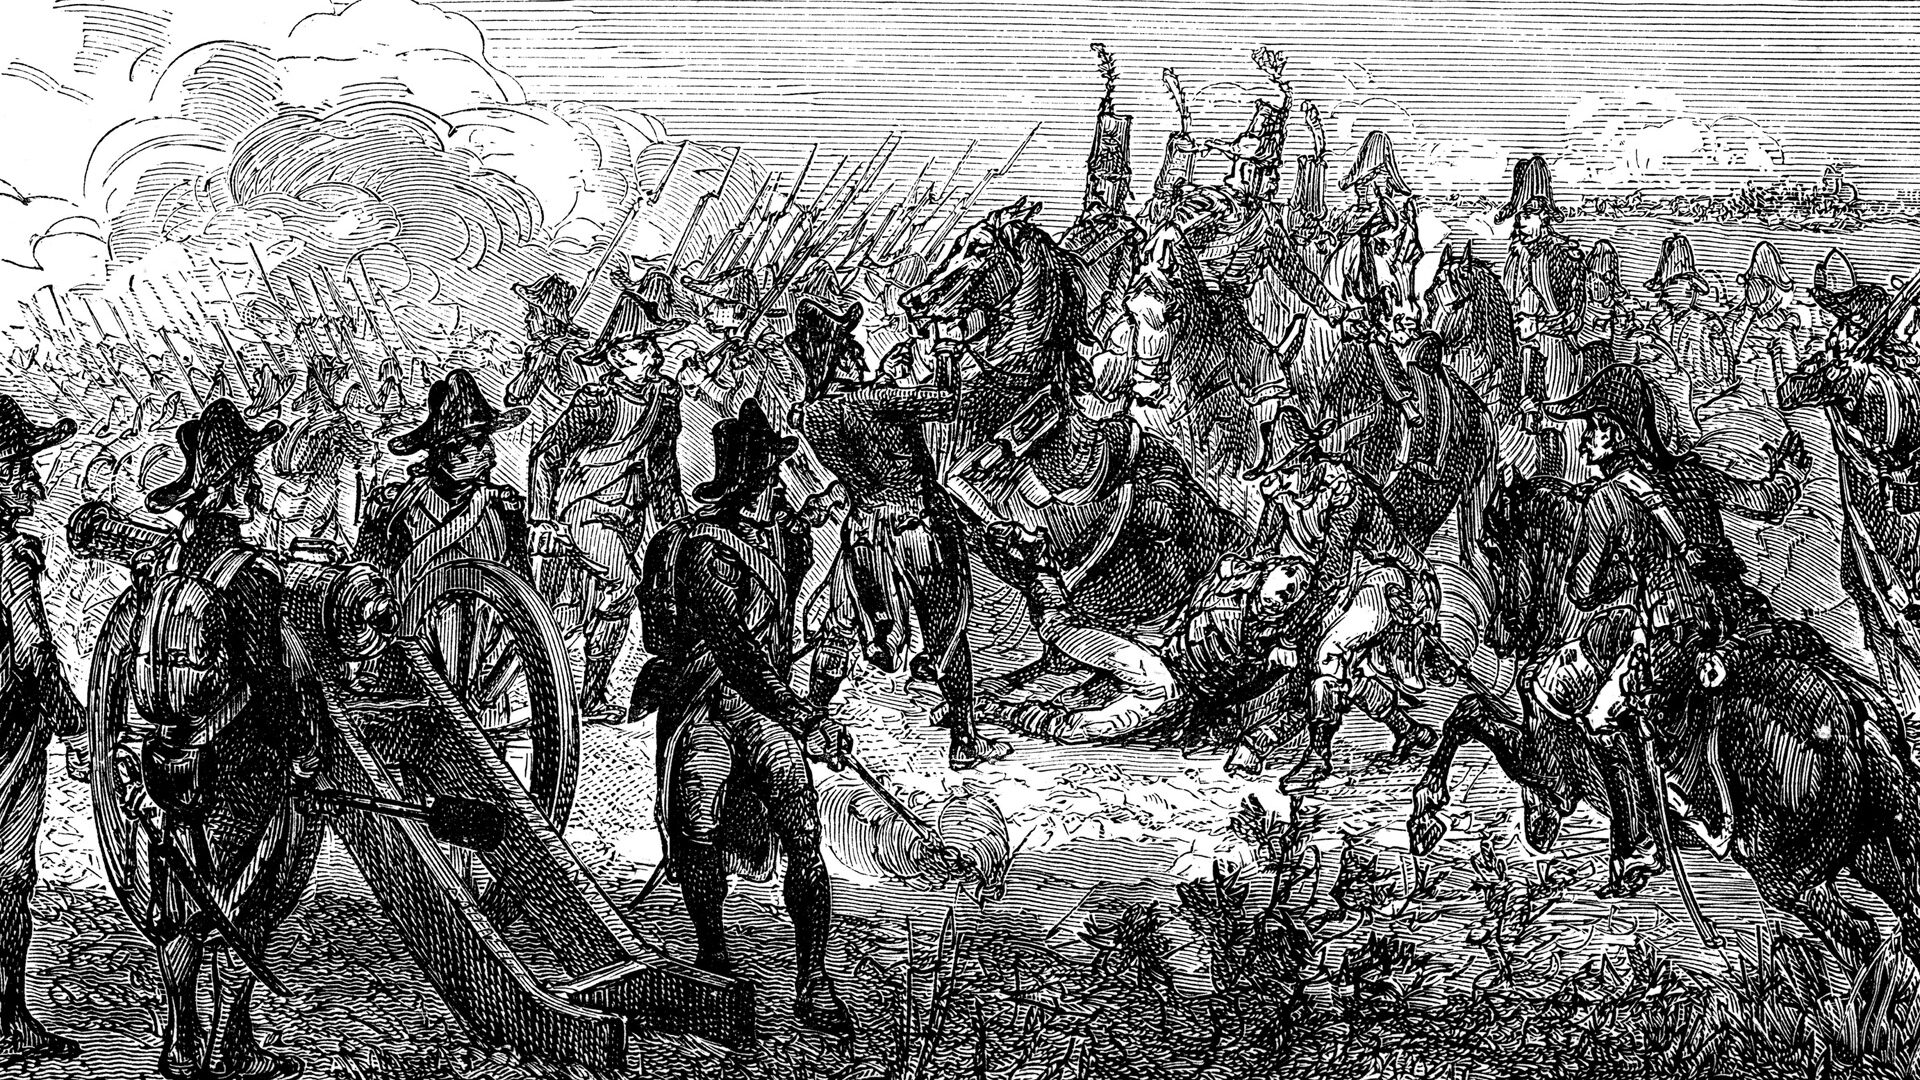 In the confusion of Suvorov's sledgehammer attack at Novi, Joubert made the fatal mistake of leading troops into battle in the opening phase and was cut down by an Austrian volley. 